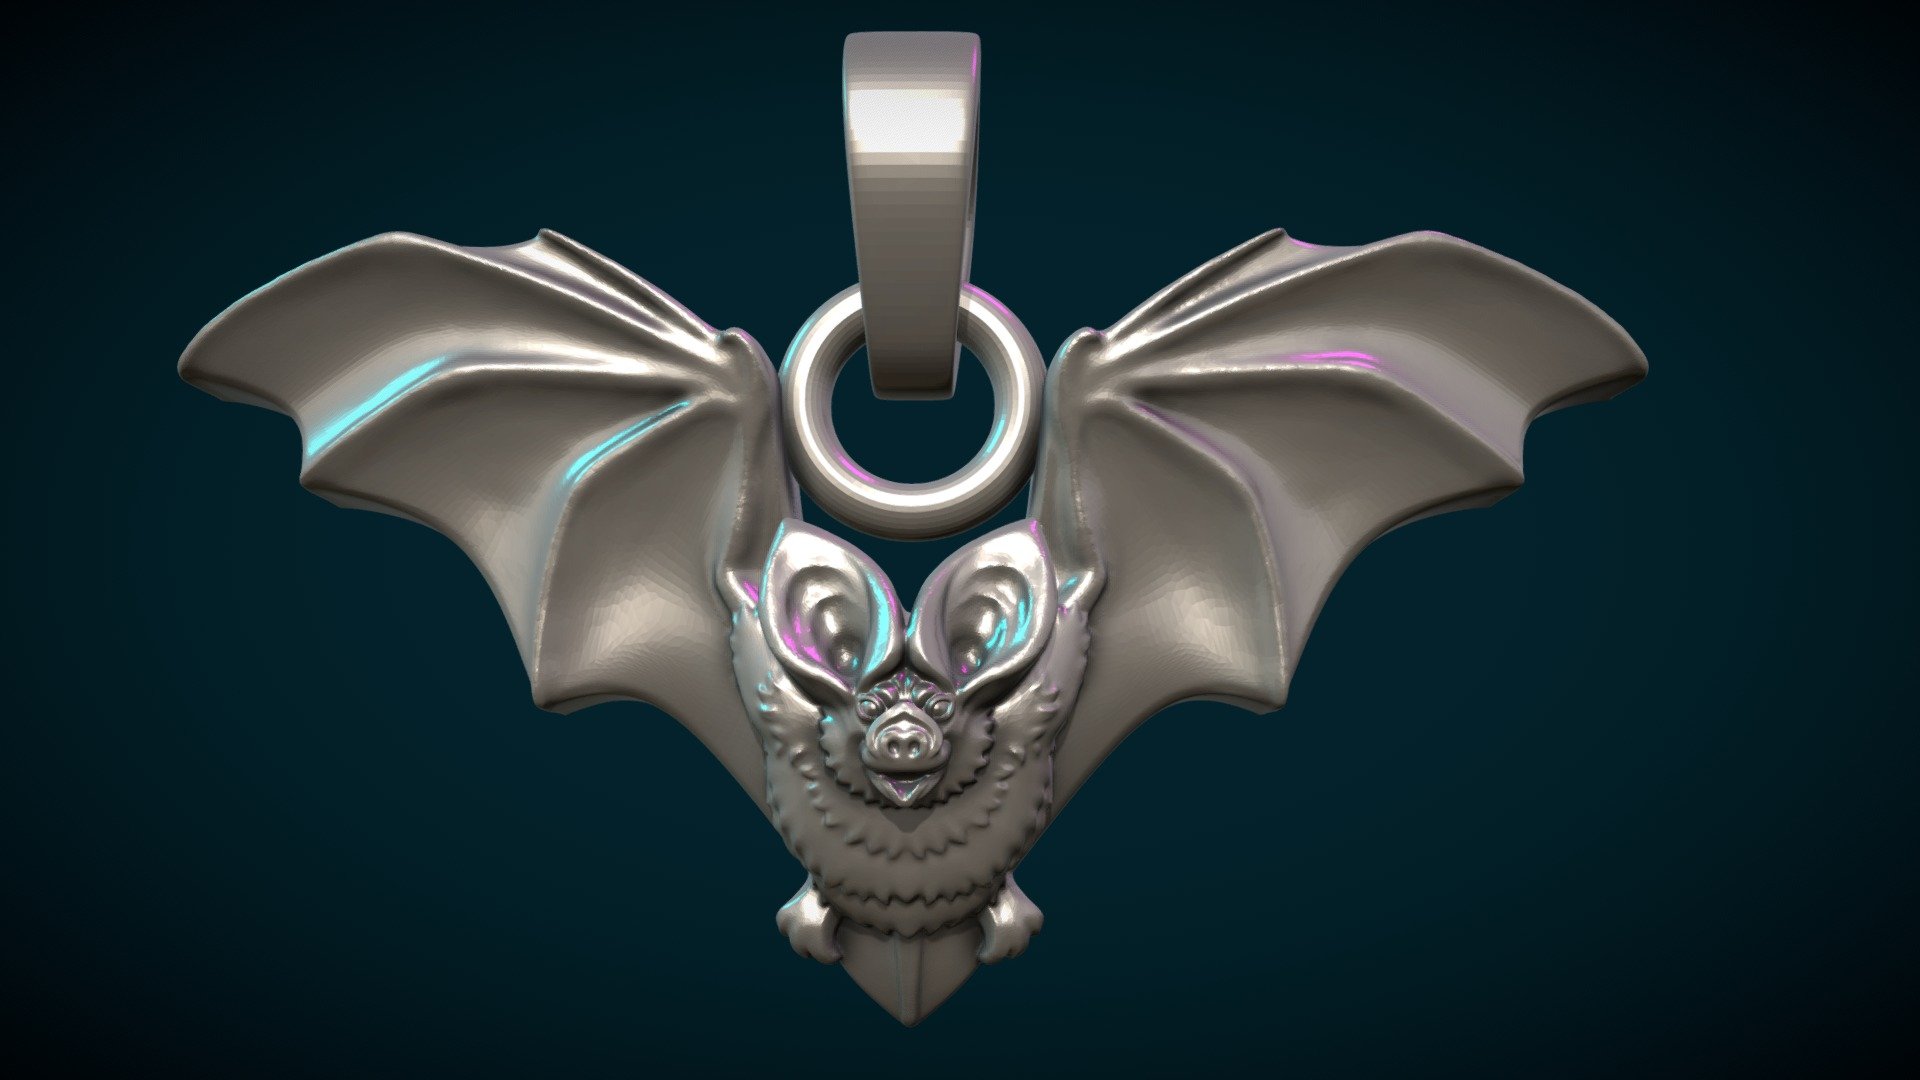 Print ready bat pendant.

Measure units are millimeters, the figure is about 3 cm in width.

Mesh is manifold, no holes, no inverted faces, no bad contiguous edges.

Available formats: .blend, .stl, .obj, .fbx, .dae

Here is two versions of the model:

1) Bat_sld_pnd. (blend, .obj, .fbx, .dae. stl) This files contain solid bat pendant, circle and bail are separate parts. The model consists of 210356 triangular faces with the base.

2) Bat_hlw_pnd. (blend, .obj, .fbx, .dae. stl) Here is hollow version of the bat.

For stl there are additional files where there is the bat without bail 3d model